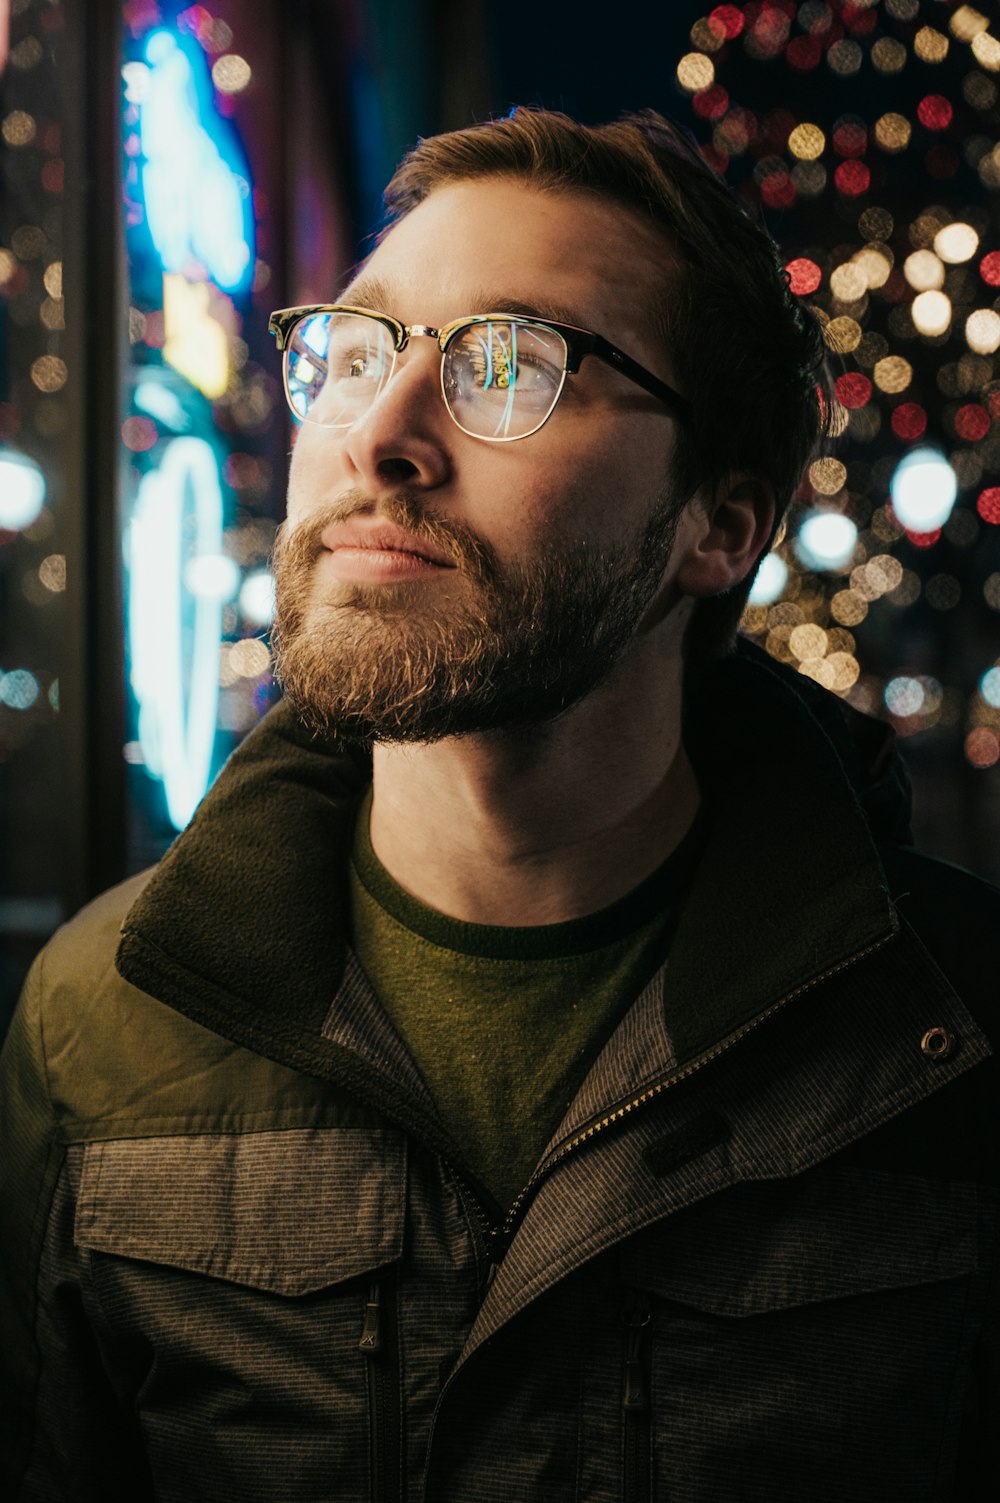 man in gray and green collared jacket wearing eyeglasses with turned-on lights